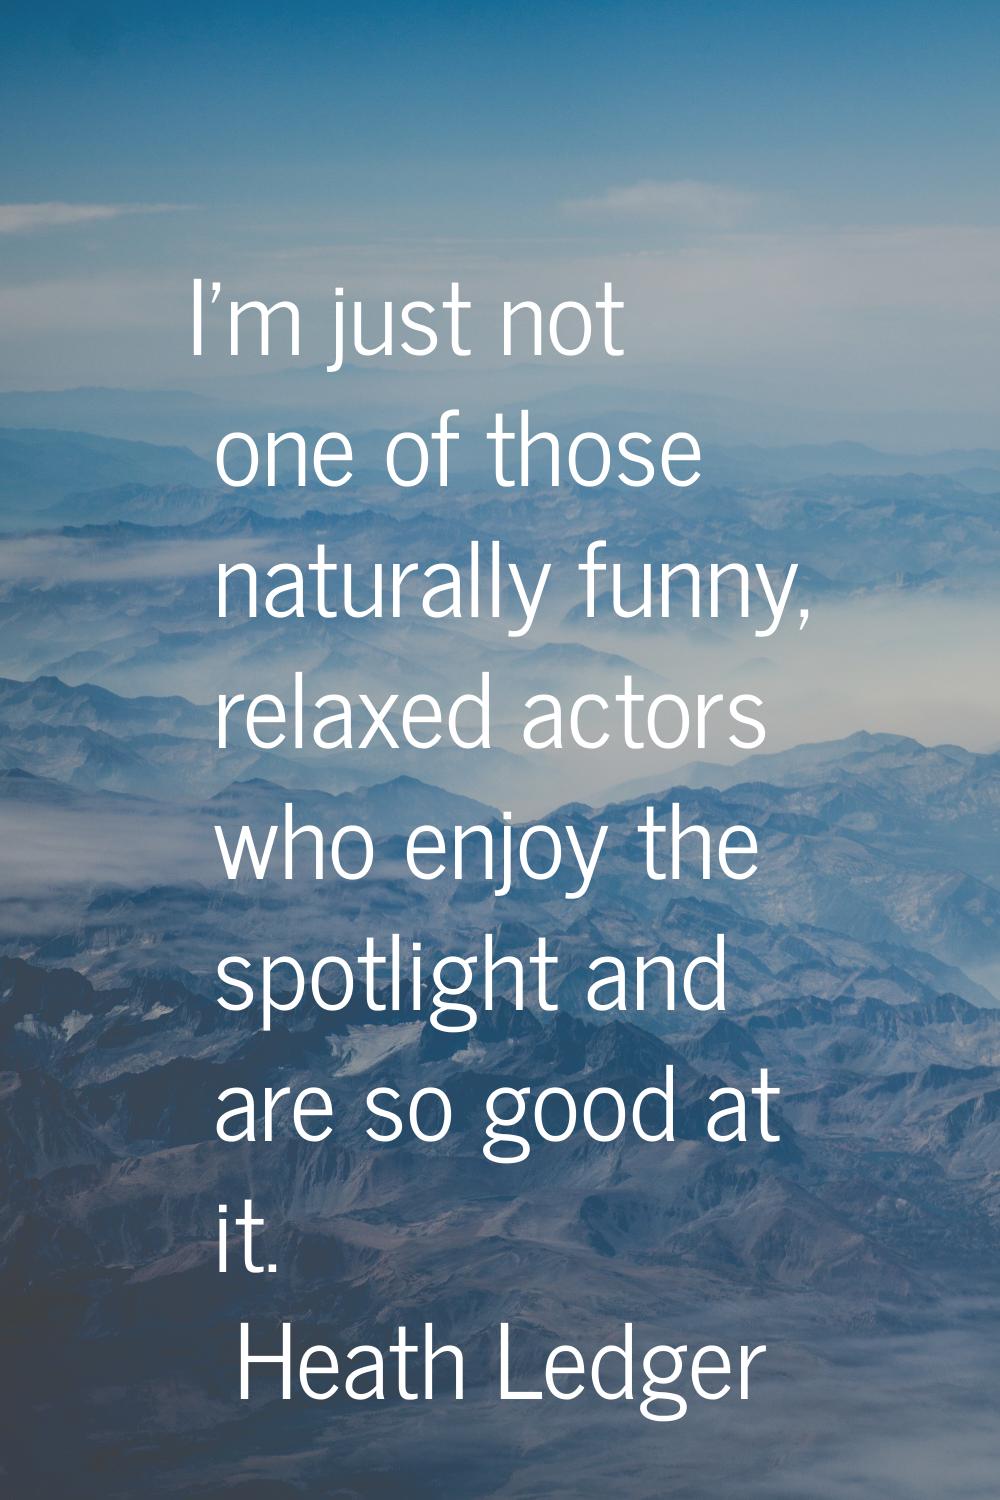 I'm just not one of those naturally funny, relaxed actors who enjoy the spotlight and are so good a